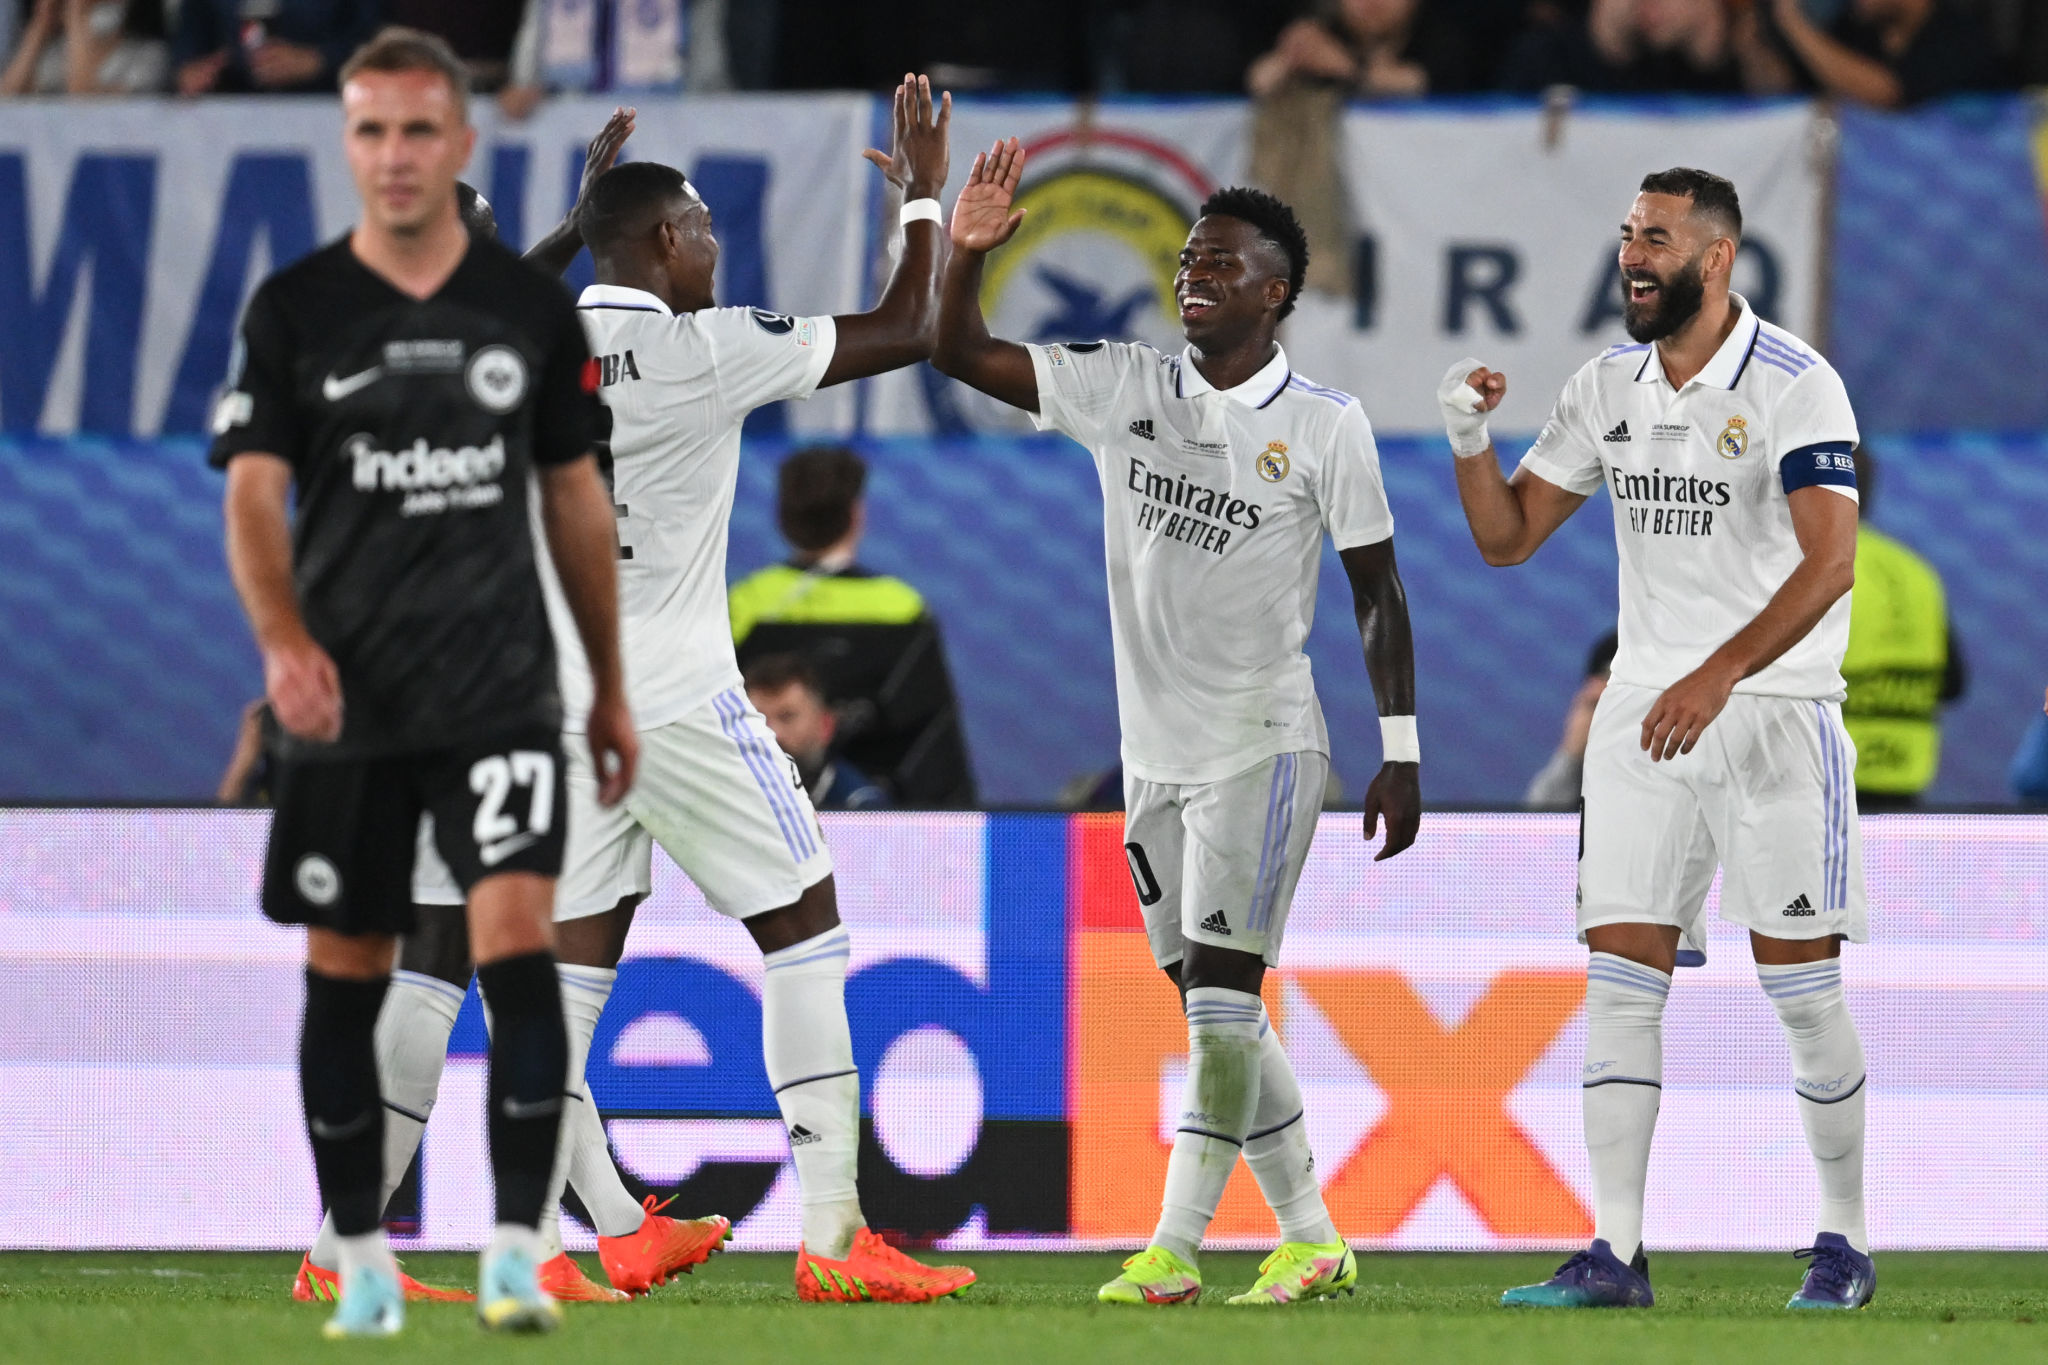 Real Madrid all-time scorers: Karim Benzema moves into SECOND place in Real Madrid's all-time goalscoring charts just behind Cristiano Ronaldo as Real Madrid win 2022 Super Cup beating Frankfurt 2-0, Check DETAILS